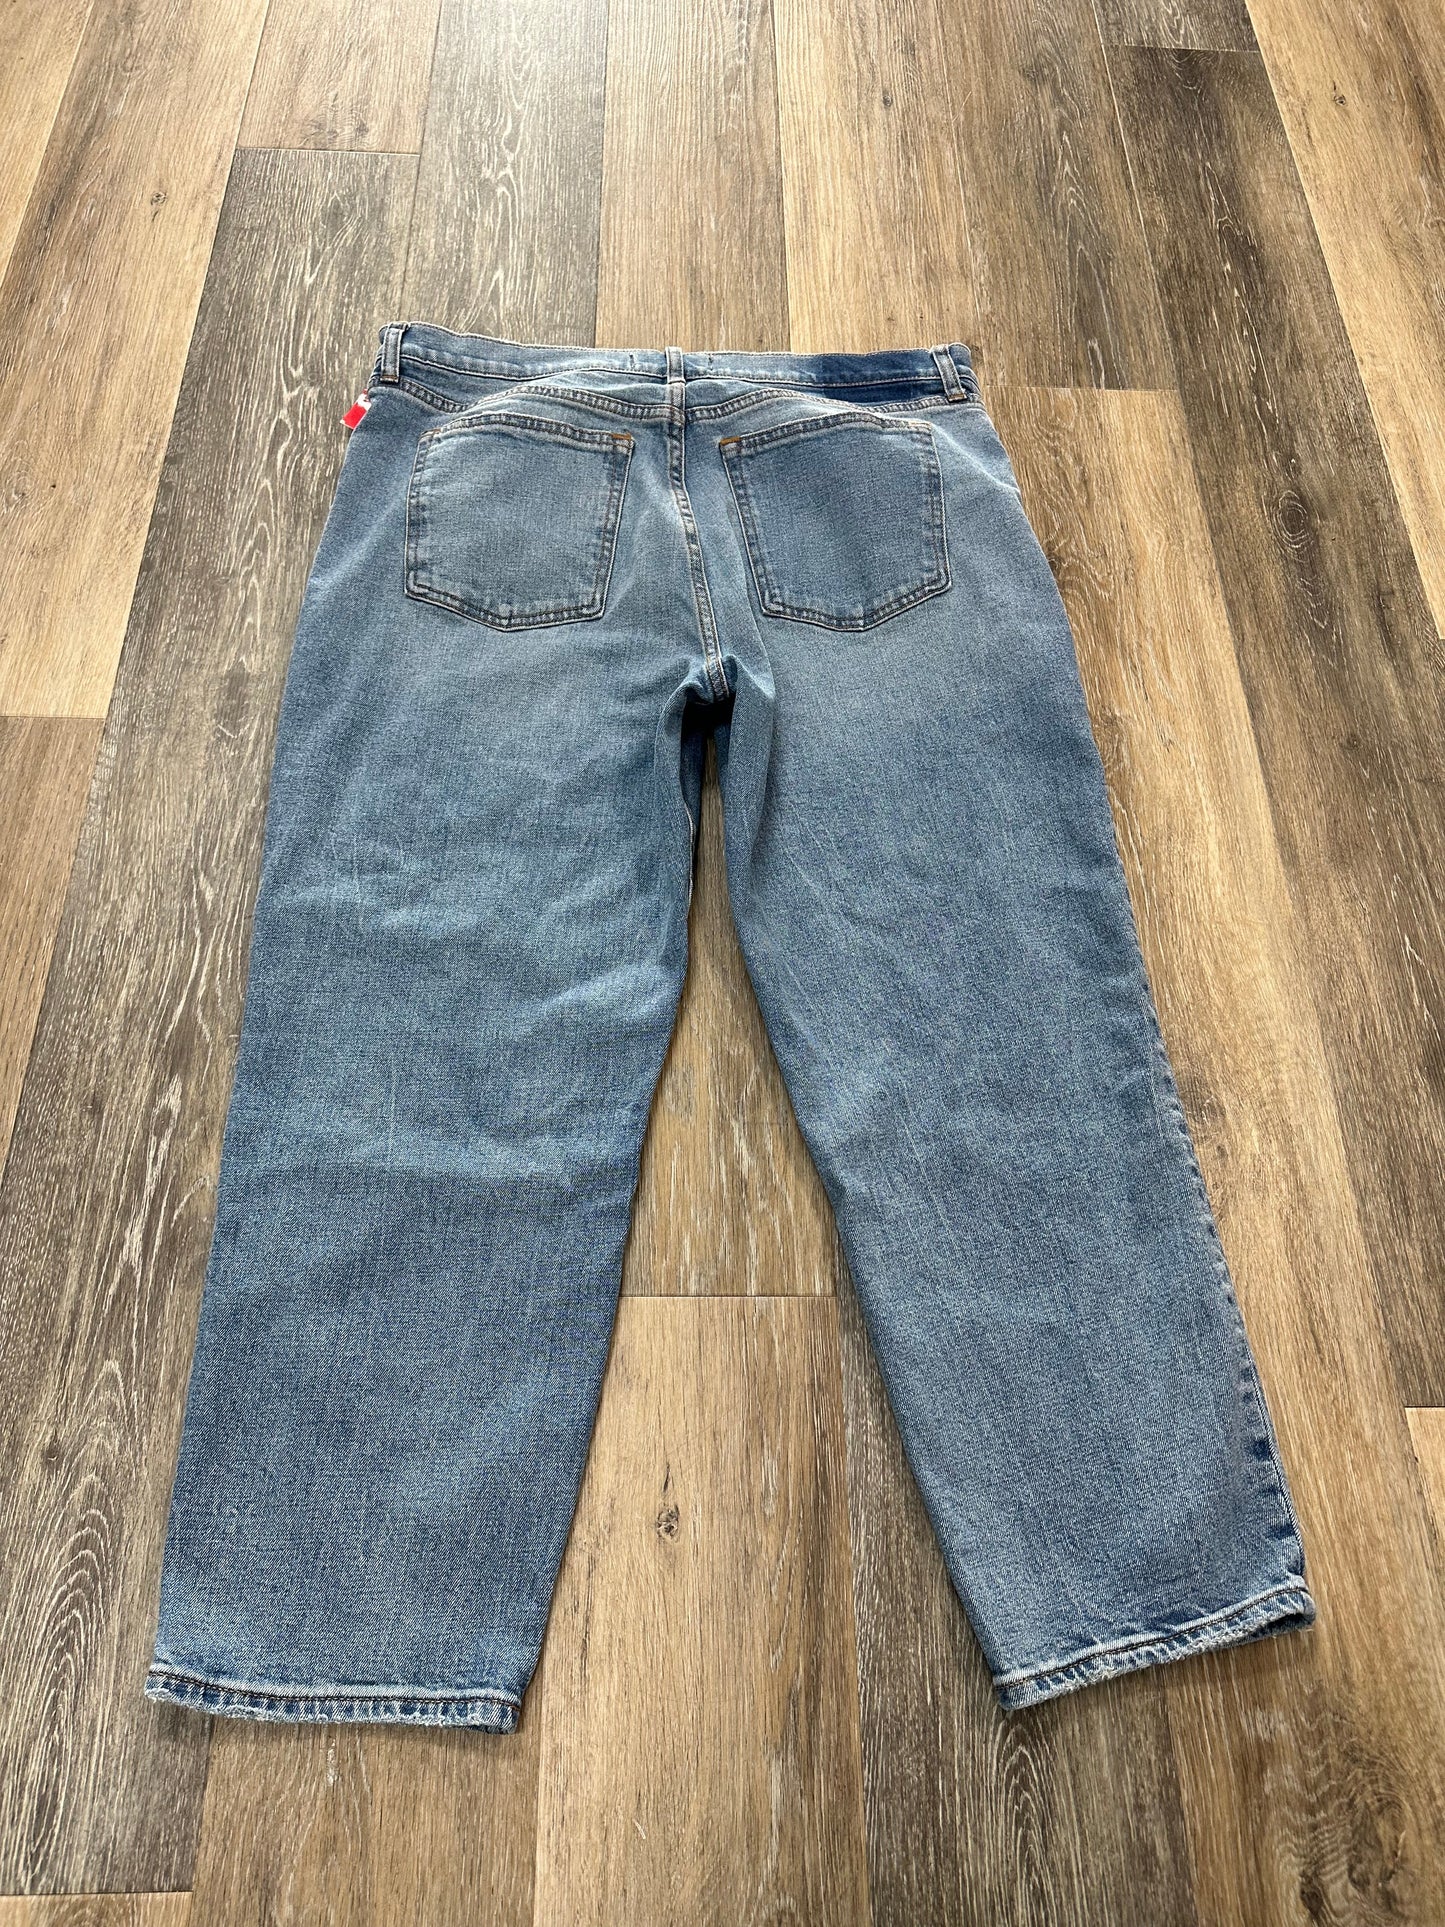 Jeans Straight By Abercrombie And Fitch  Size: 16